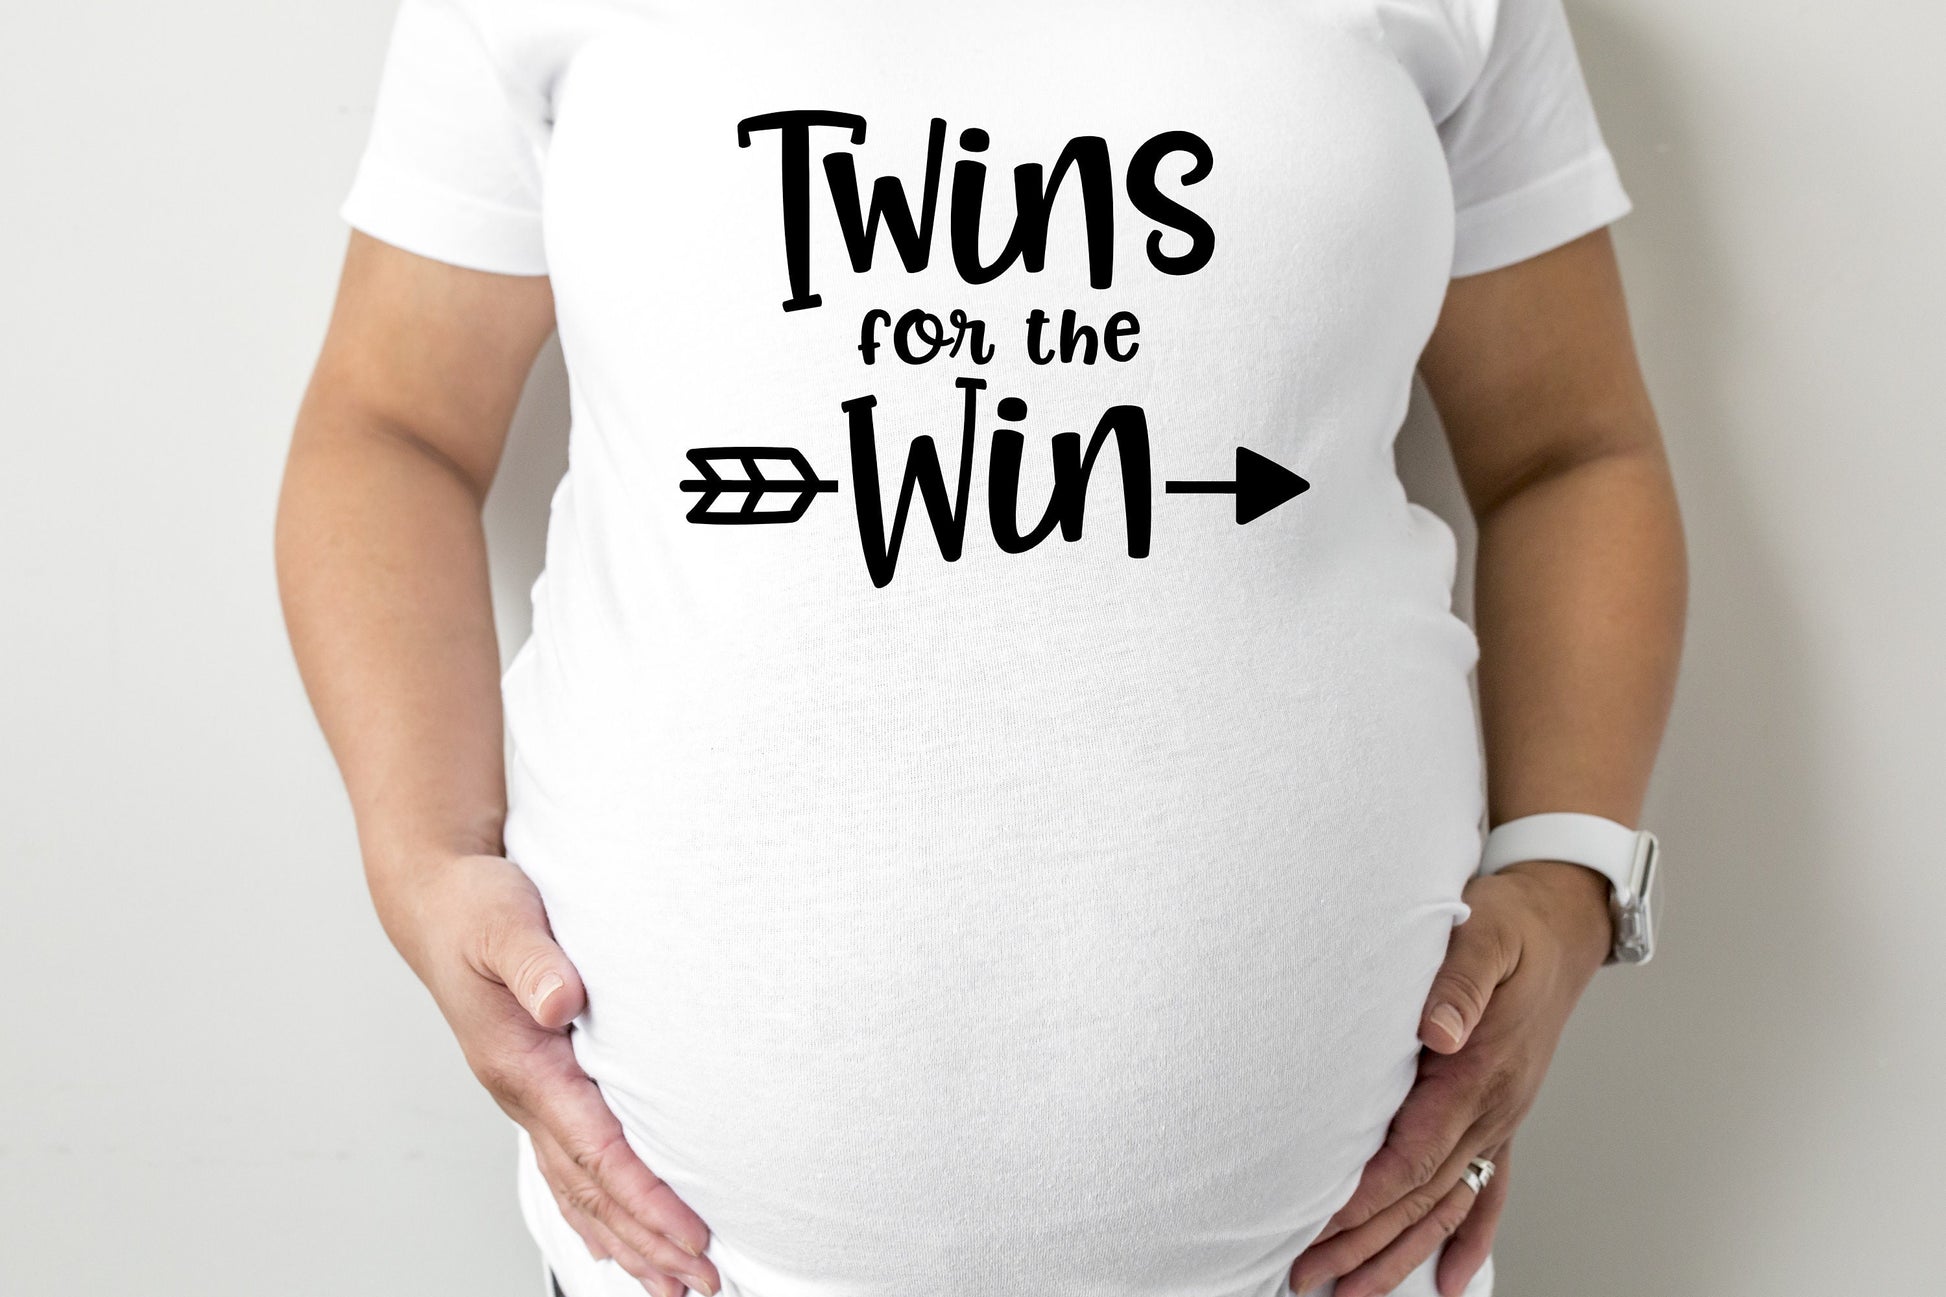 Twins for the Win Maternity T-Shirt - maternity cut shirt with ruched sides - pregnancy announcement - maternity shirt - funny maternity tee